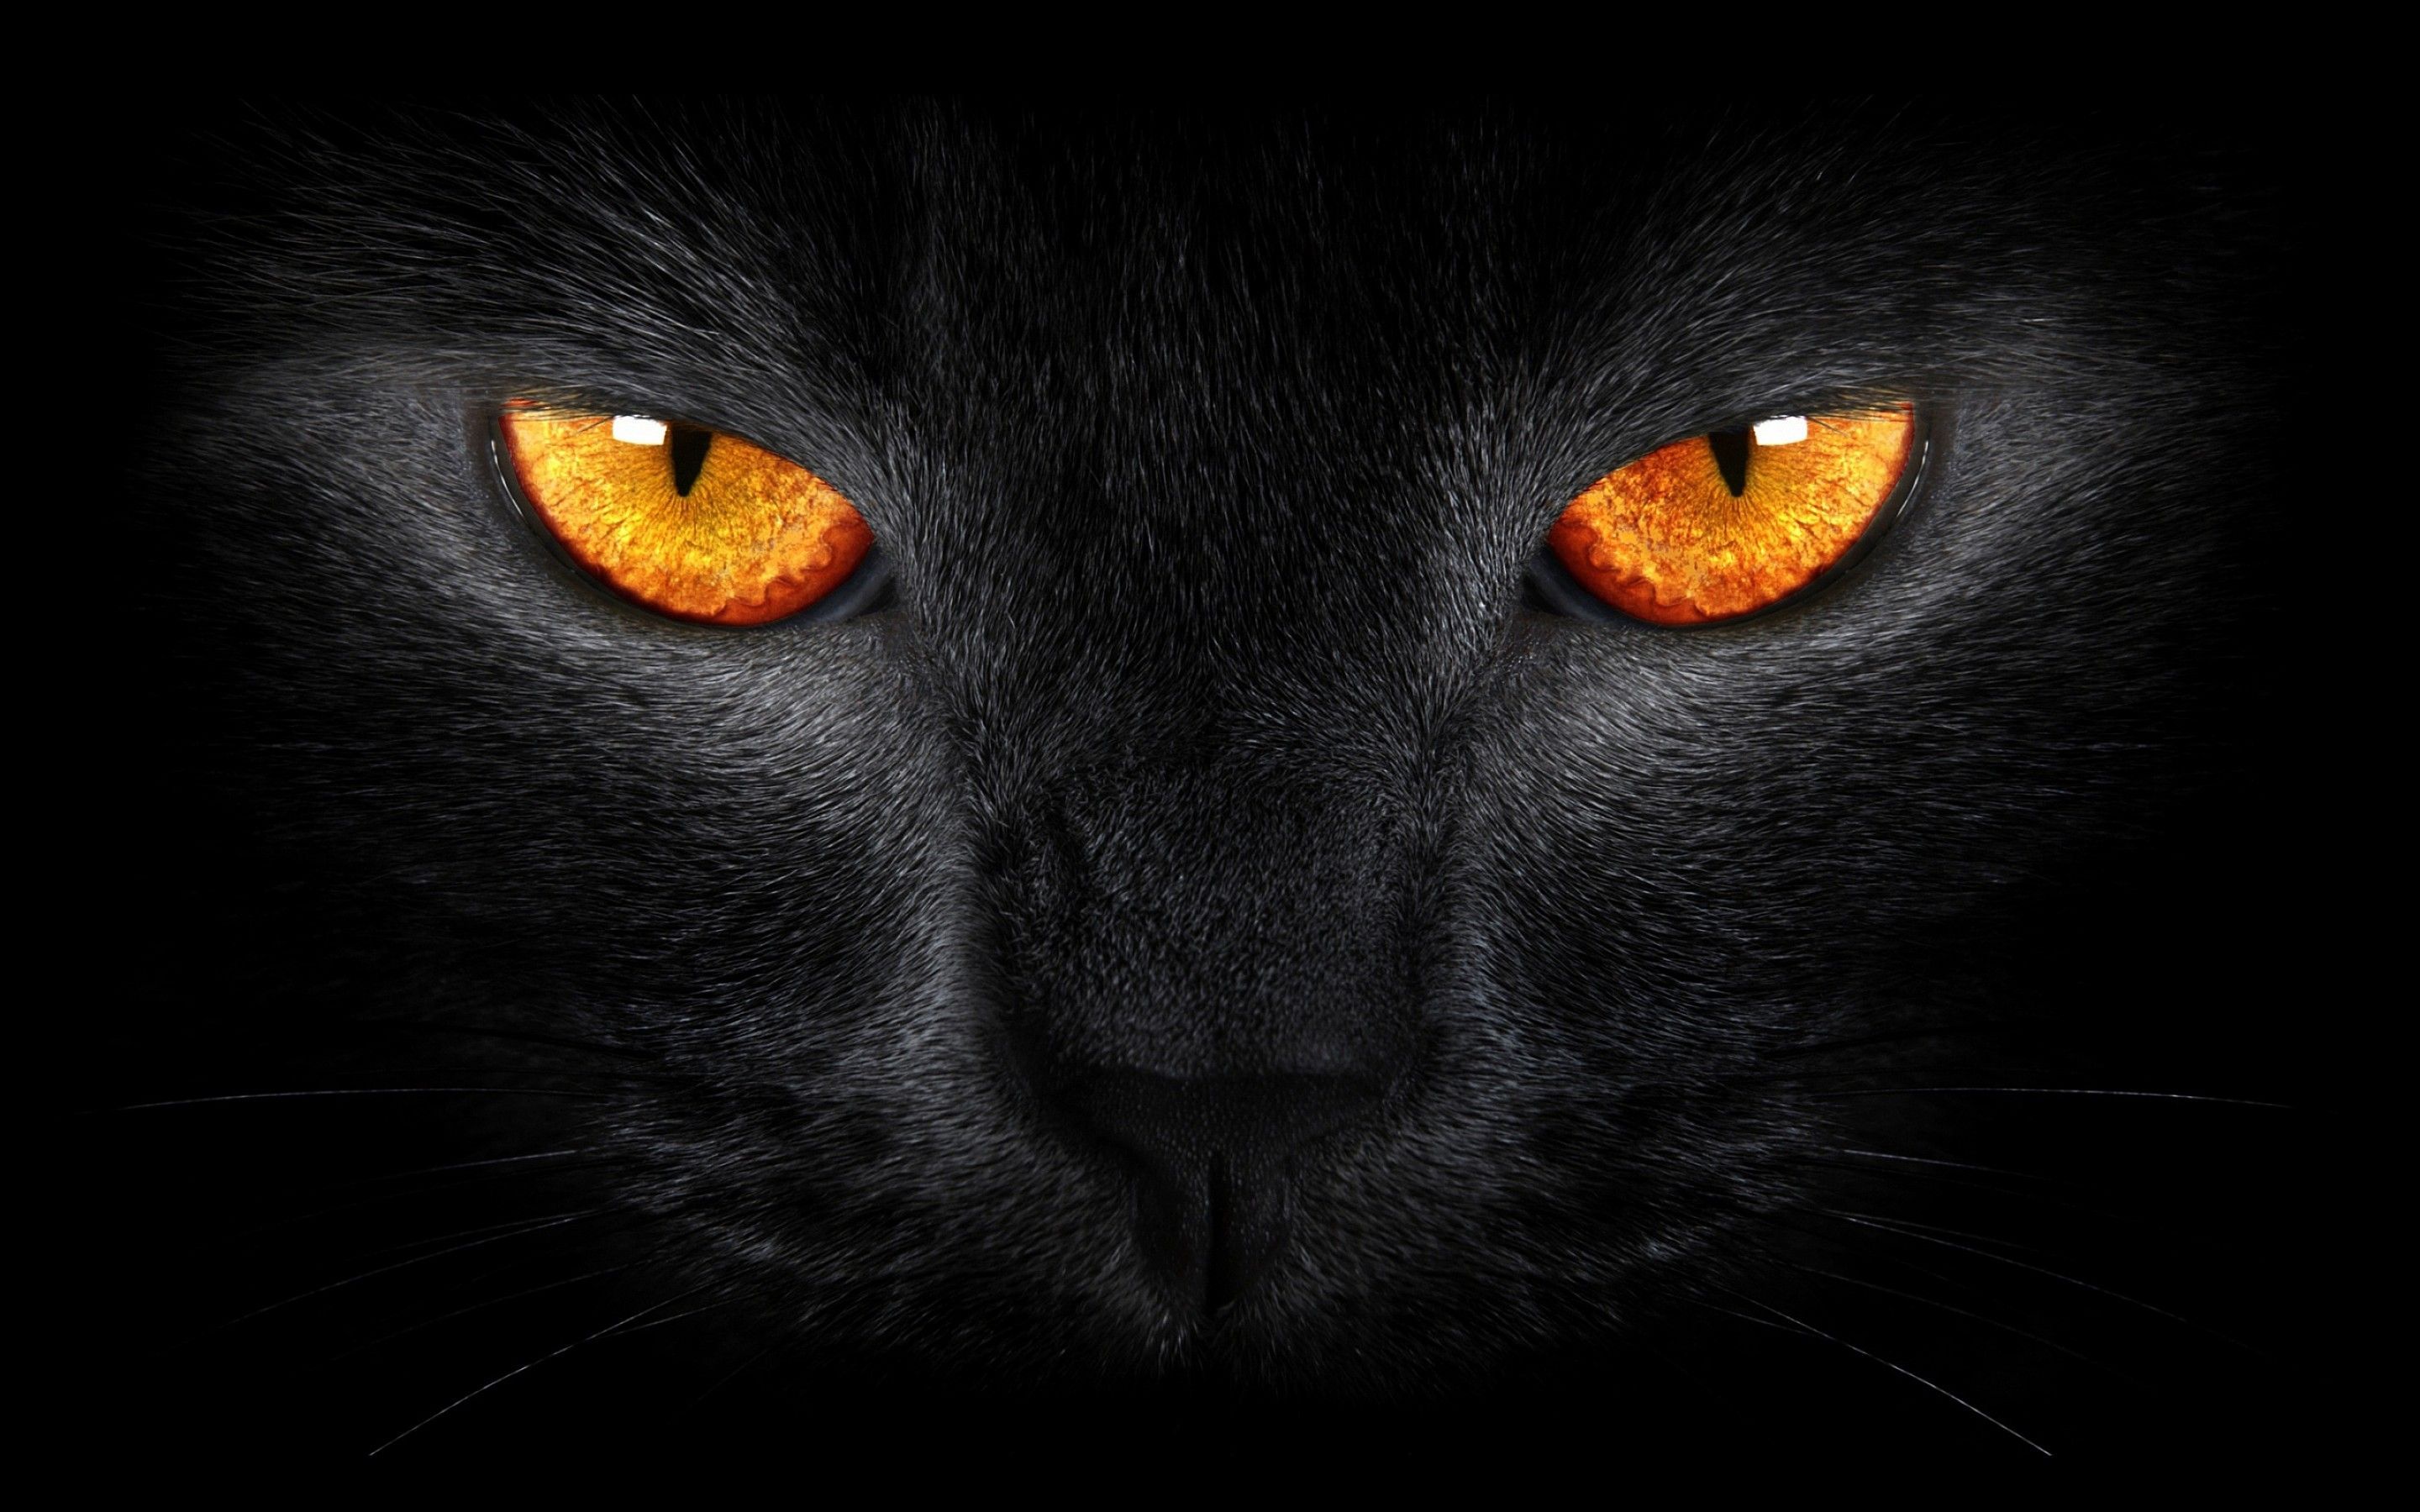 Scary Cat Wallpaper Free Scary .wallpaperaccess.com